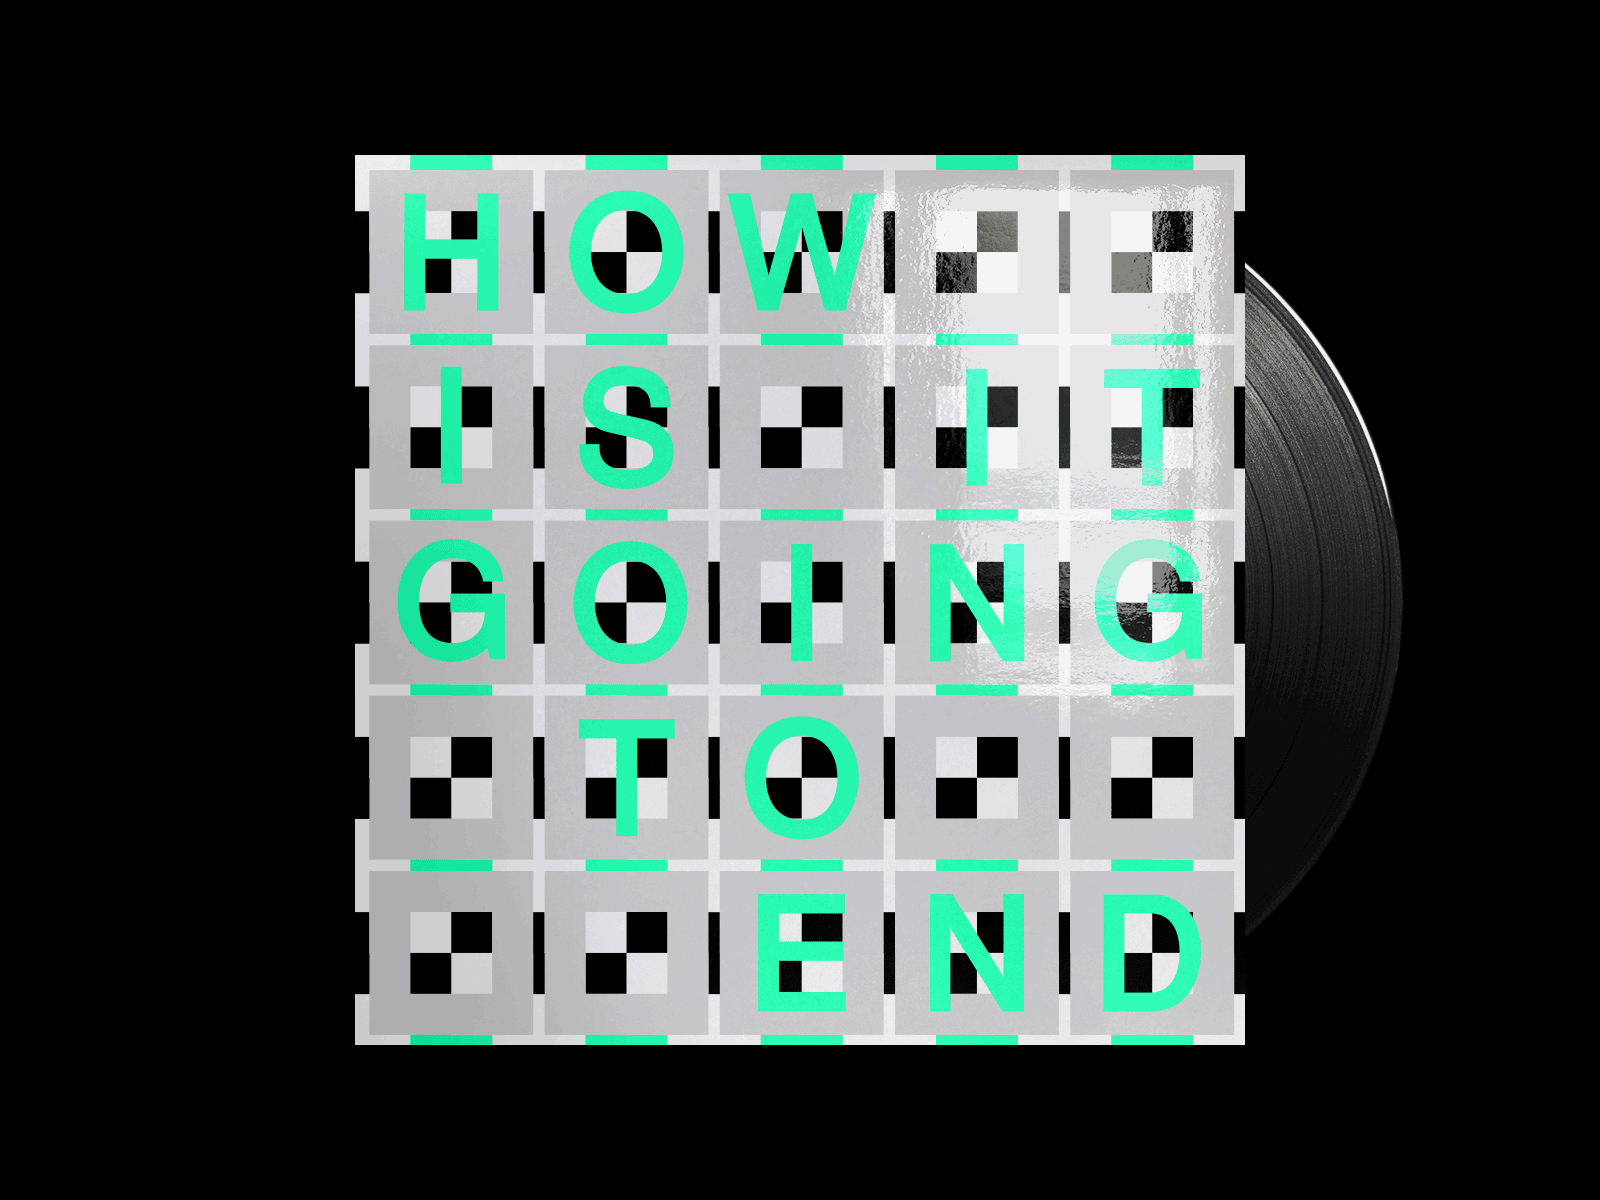 How Is It Going To End - Album artwork concept